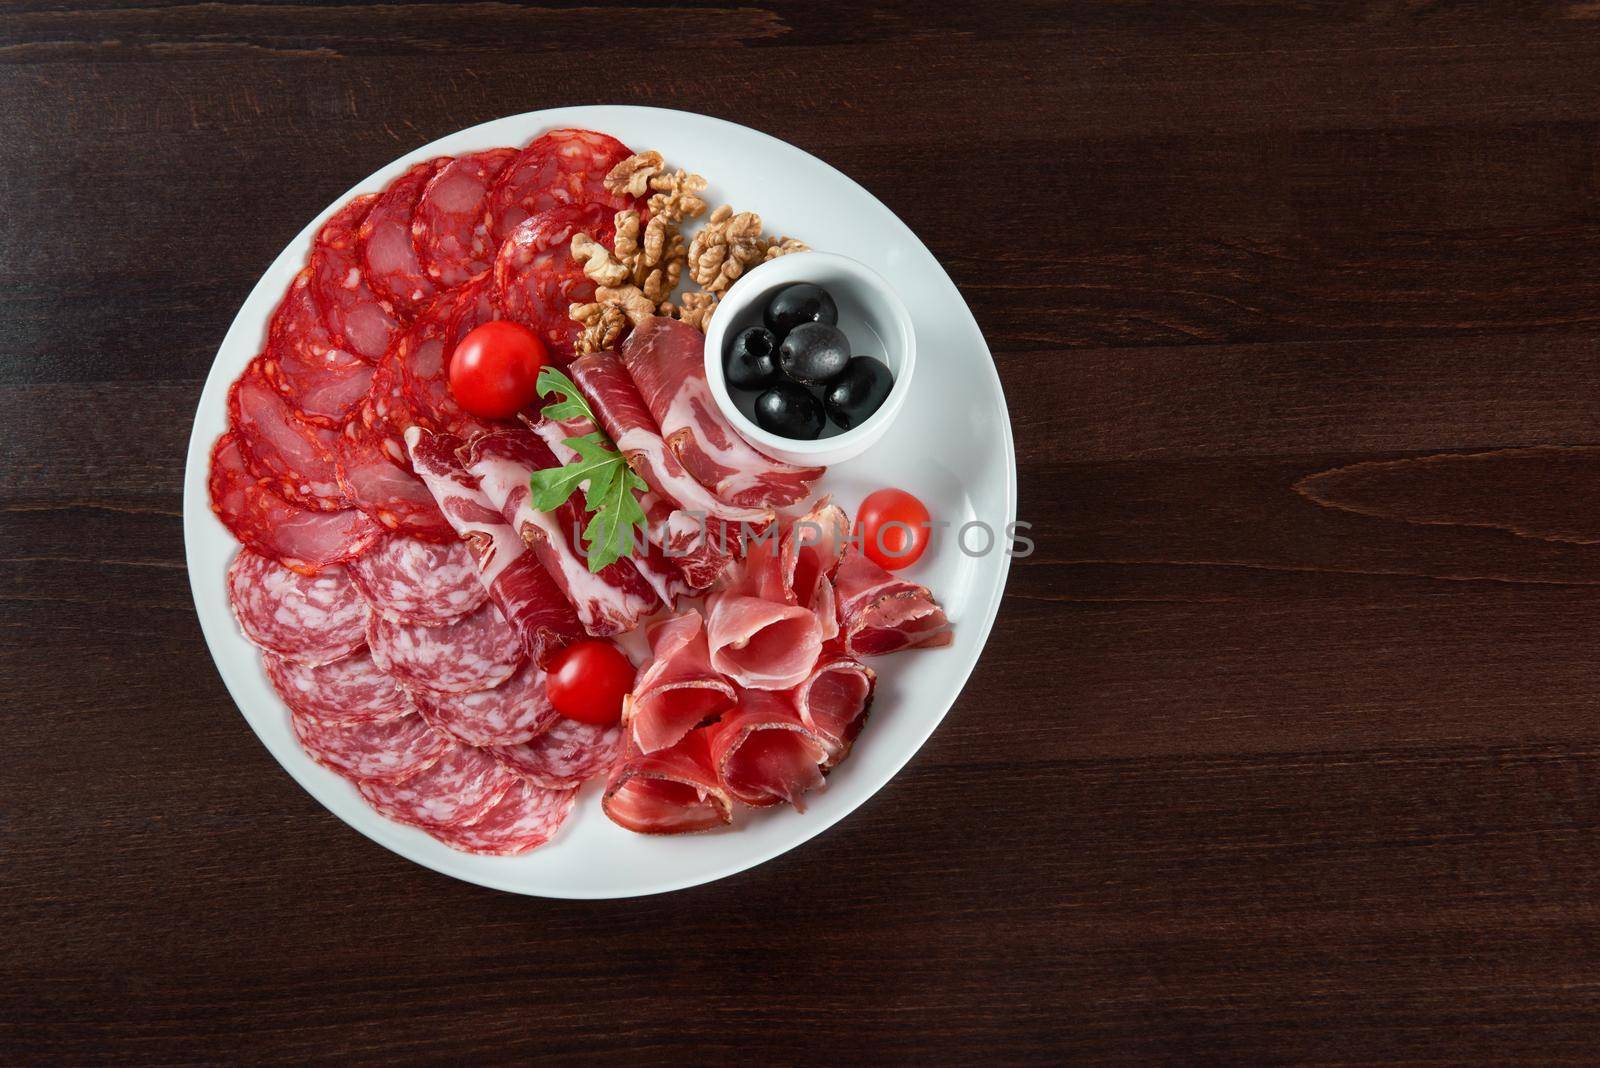 Assorted cold meat deli plate at the restaurant by SerhiiBobyk